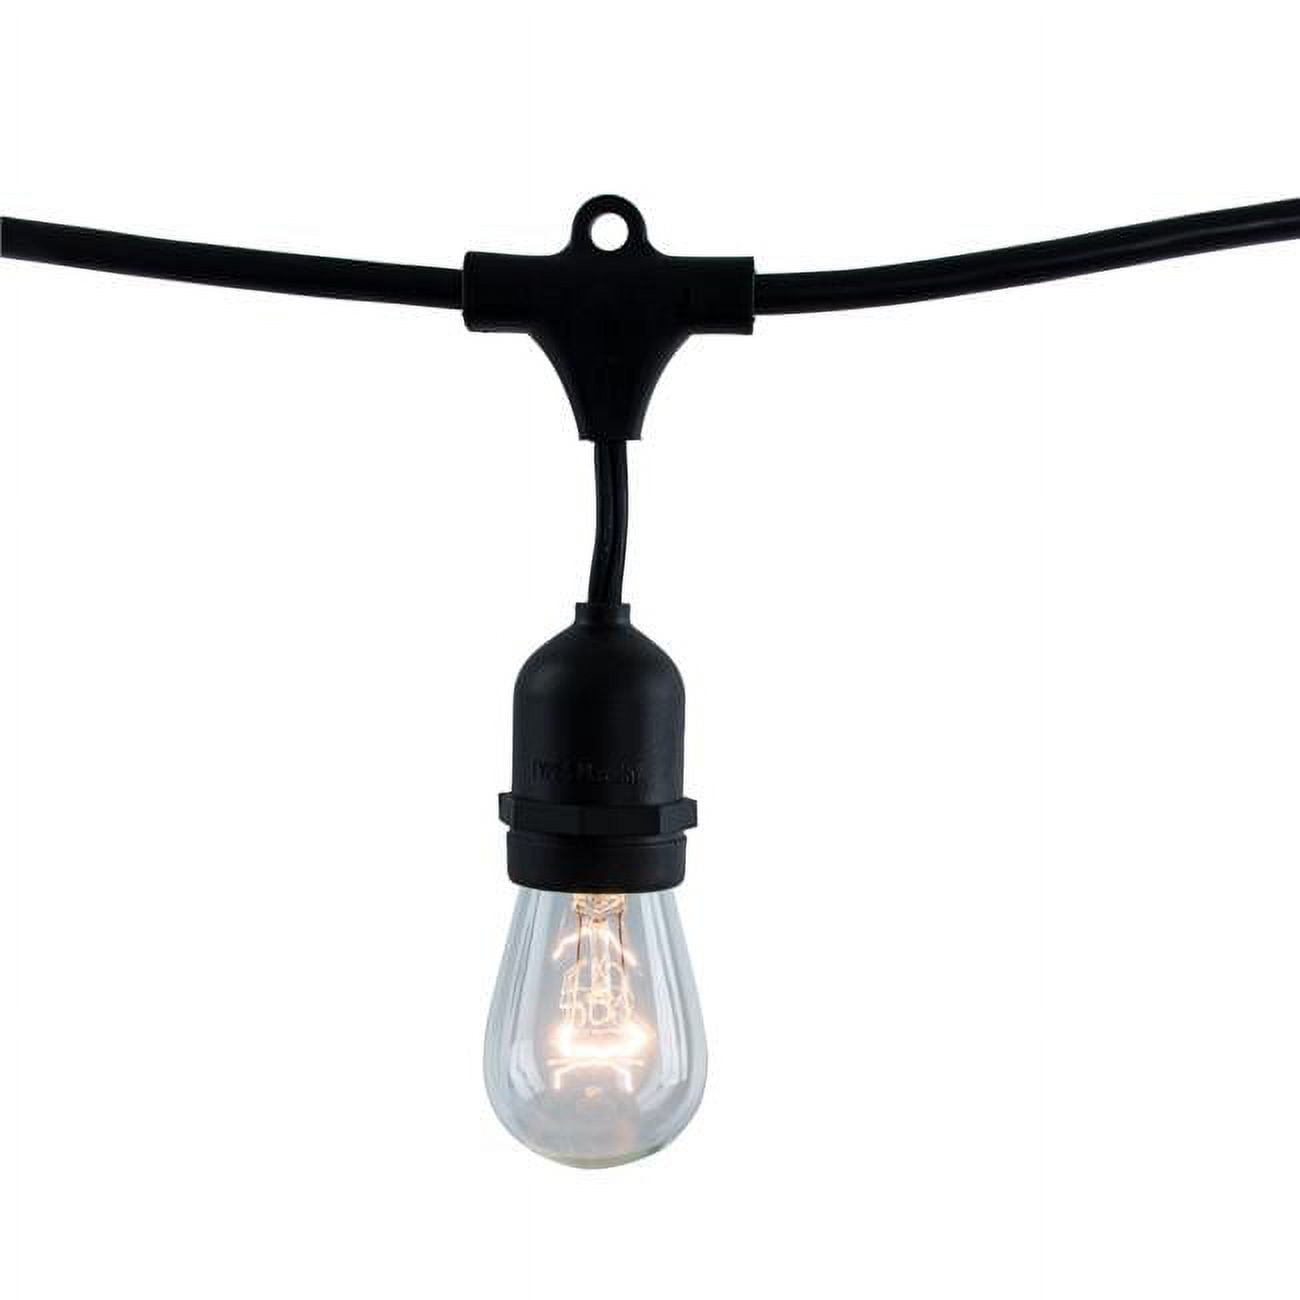 Picture of Bulbrite 812482 48 ft. String Light Kit with Vintage Style S14 Incandescent Light Bulbs, Clear